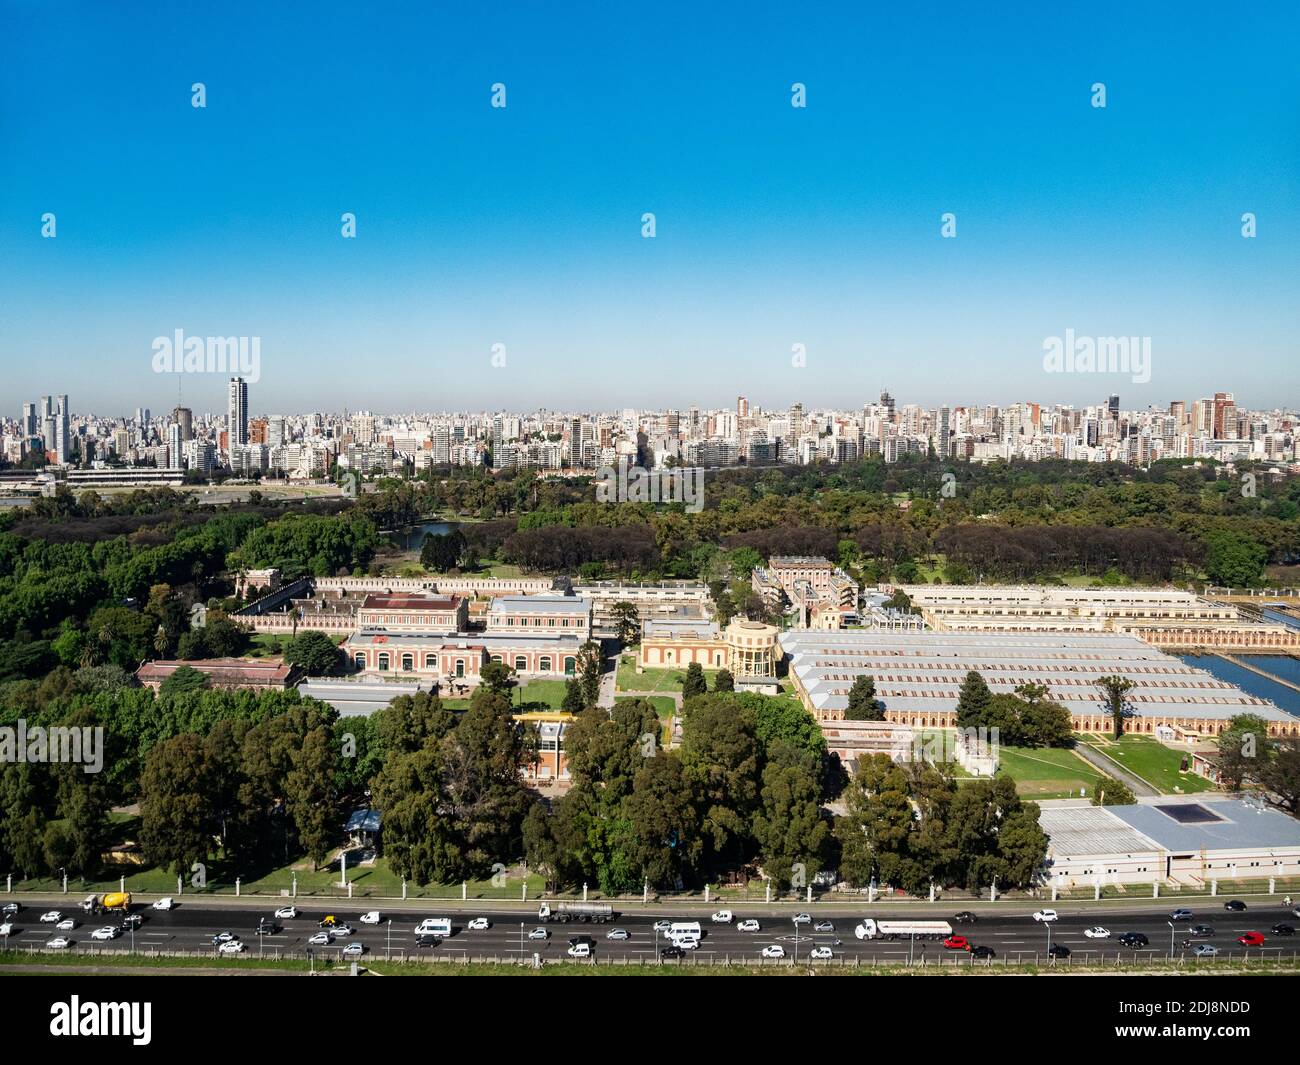 An aerial view of the capital city of Buenos Aires, Argentina taken from a commercial flight. Stock Photo